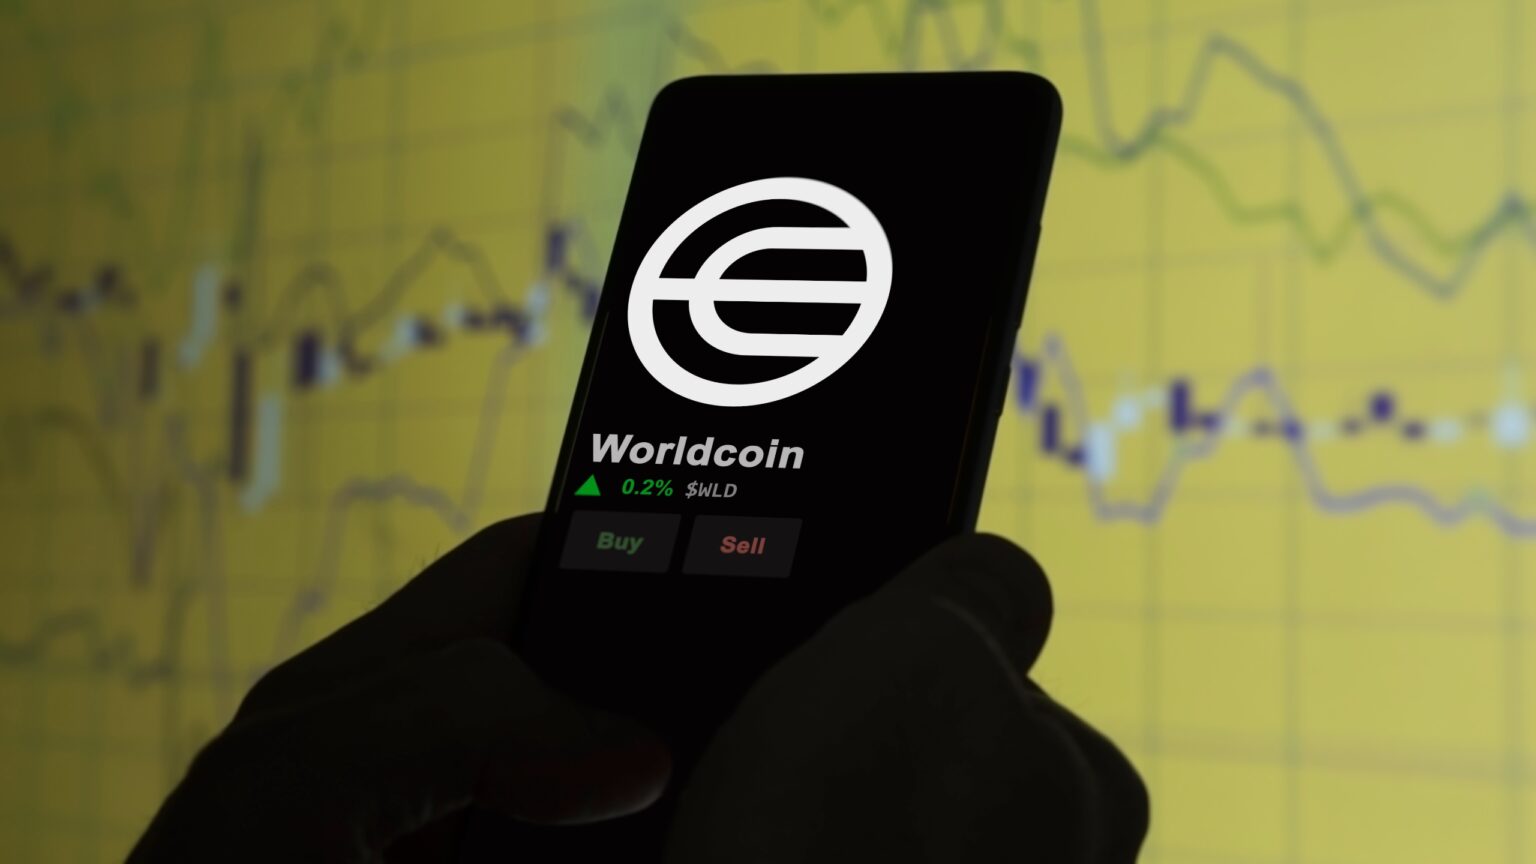 Worldcoin's Token Price Tumbles After the Sam Altman-backed Project is Banned in Spain